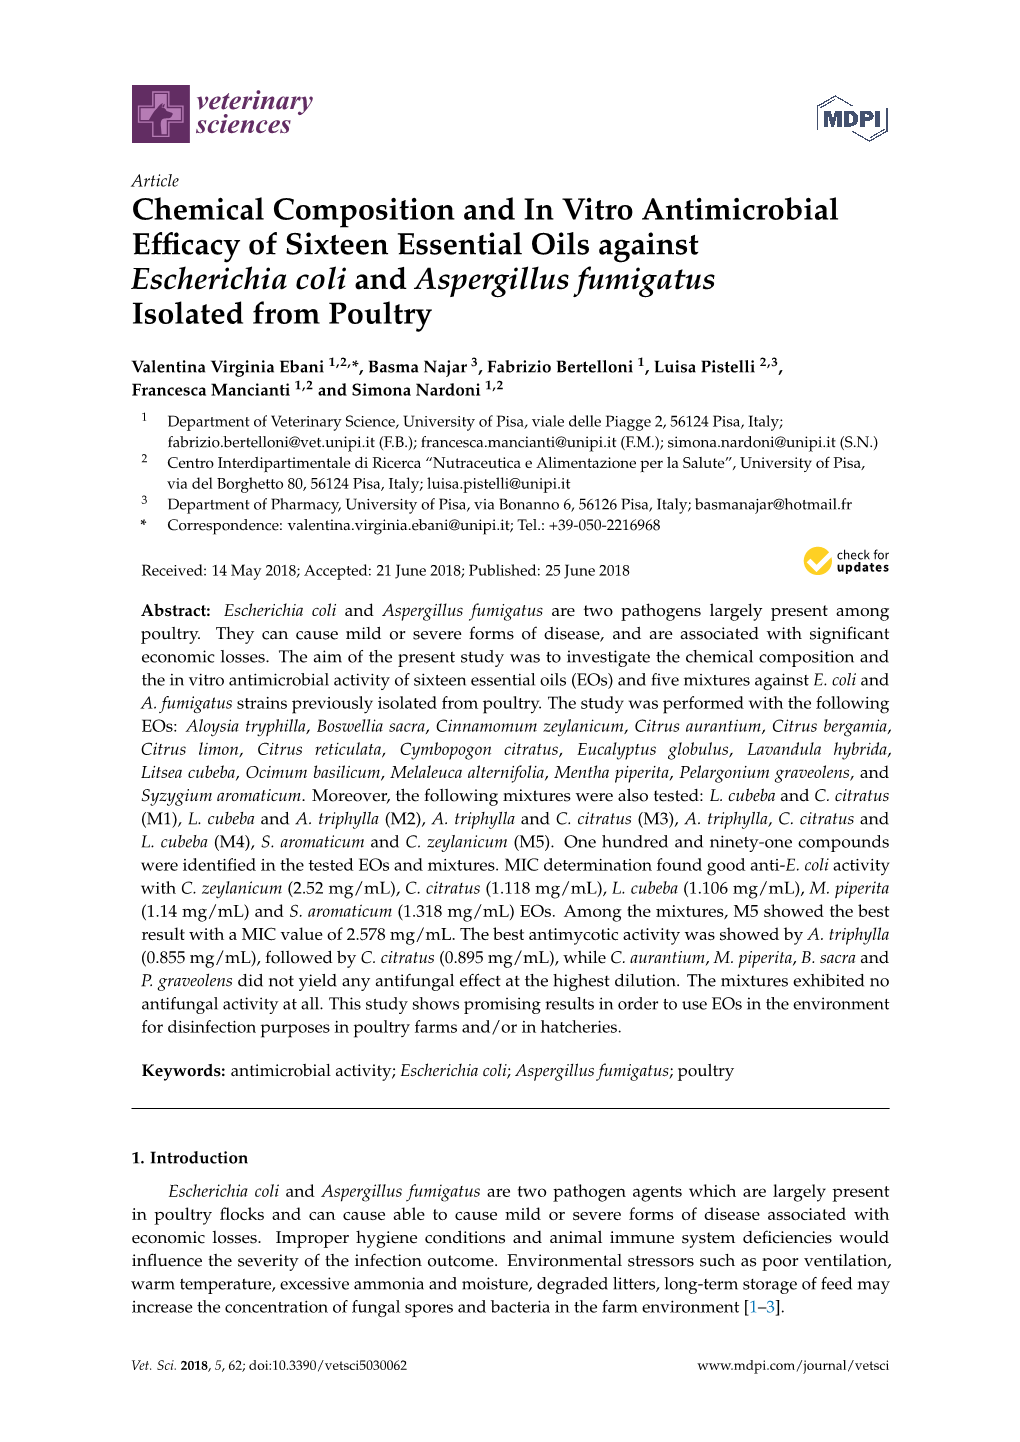 Chemical Composition and in Vitro Antimicrobial Efficacy of Sixteen